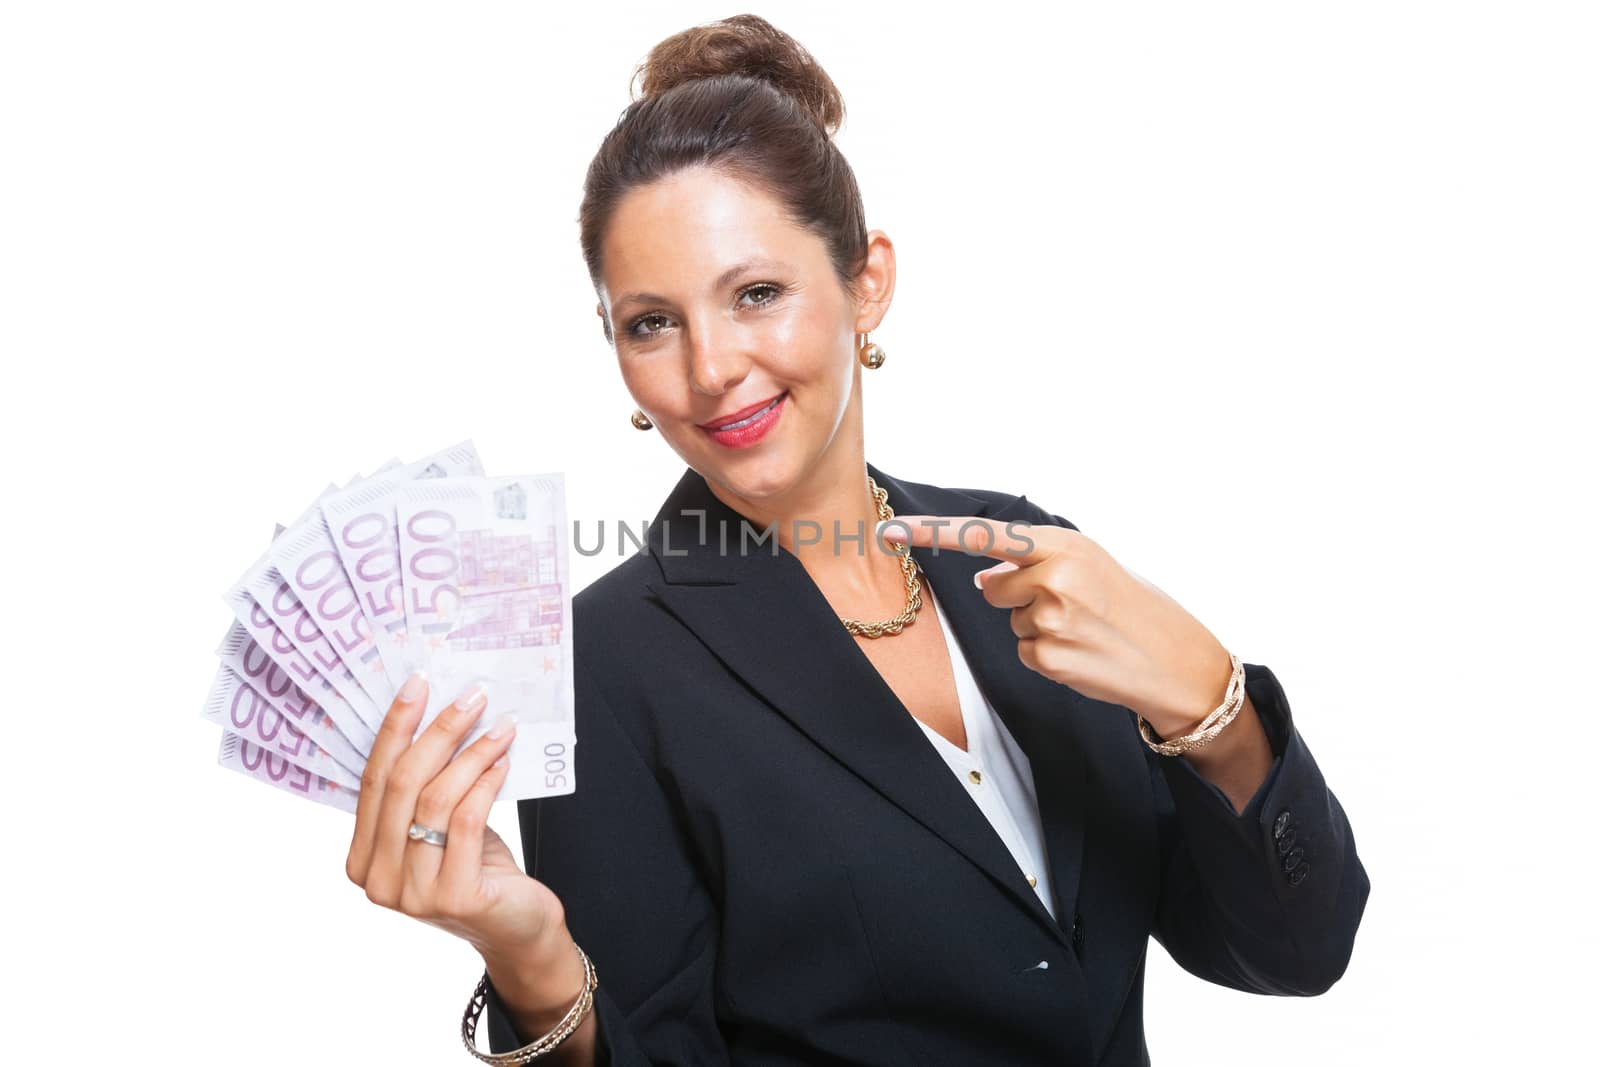 Happy Successful Young Businesswoman Holding a Fan of 500 Euro Banknotes and Looking at the Camera, Isolated on White Background.